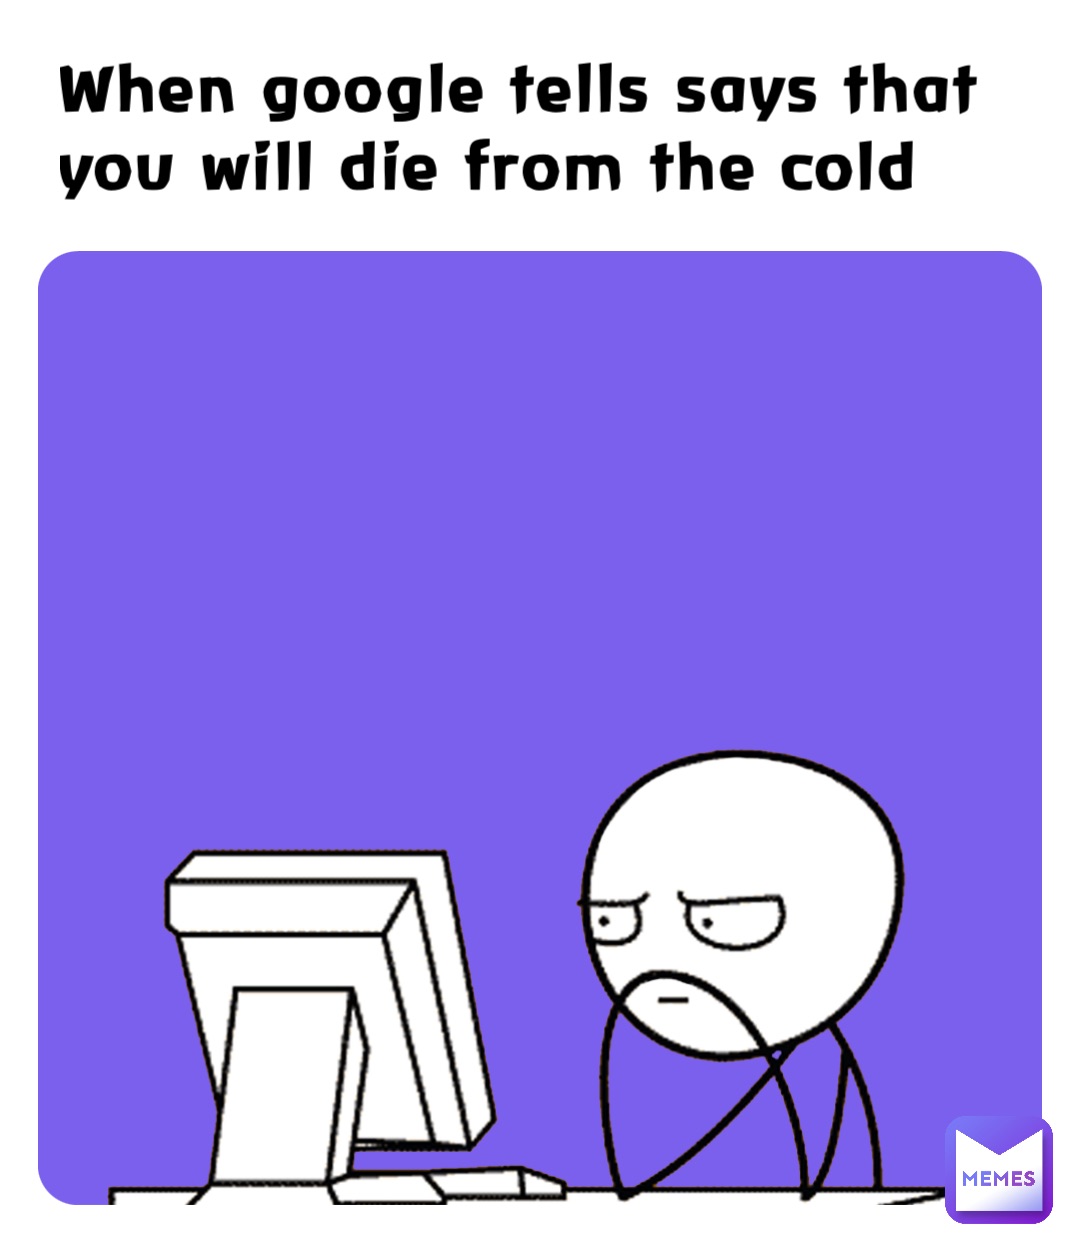 When google tells says that you will die from the cold